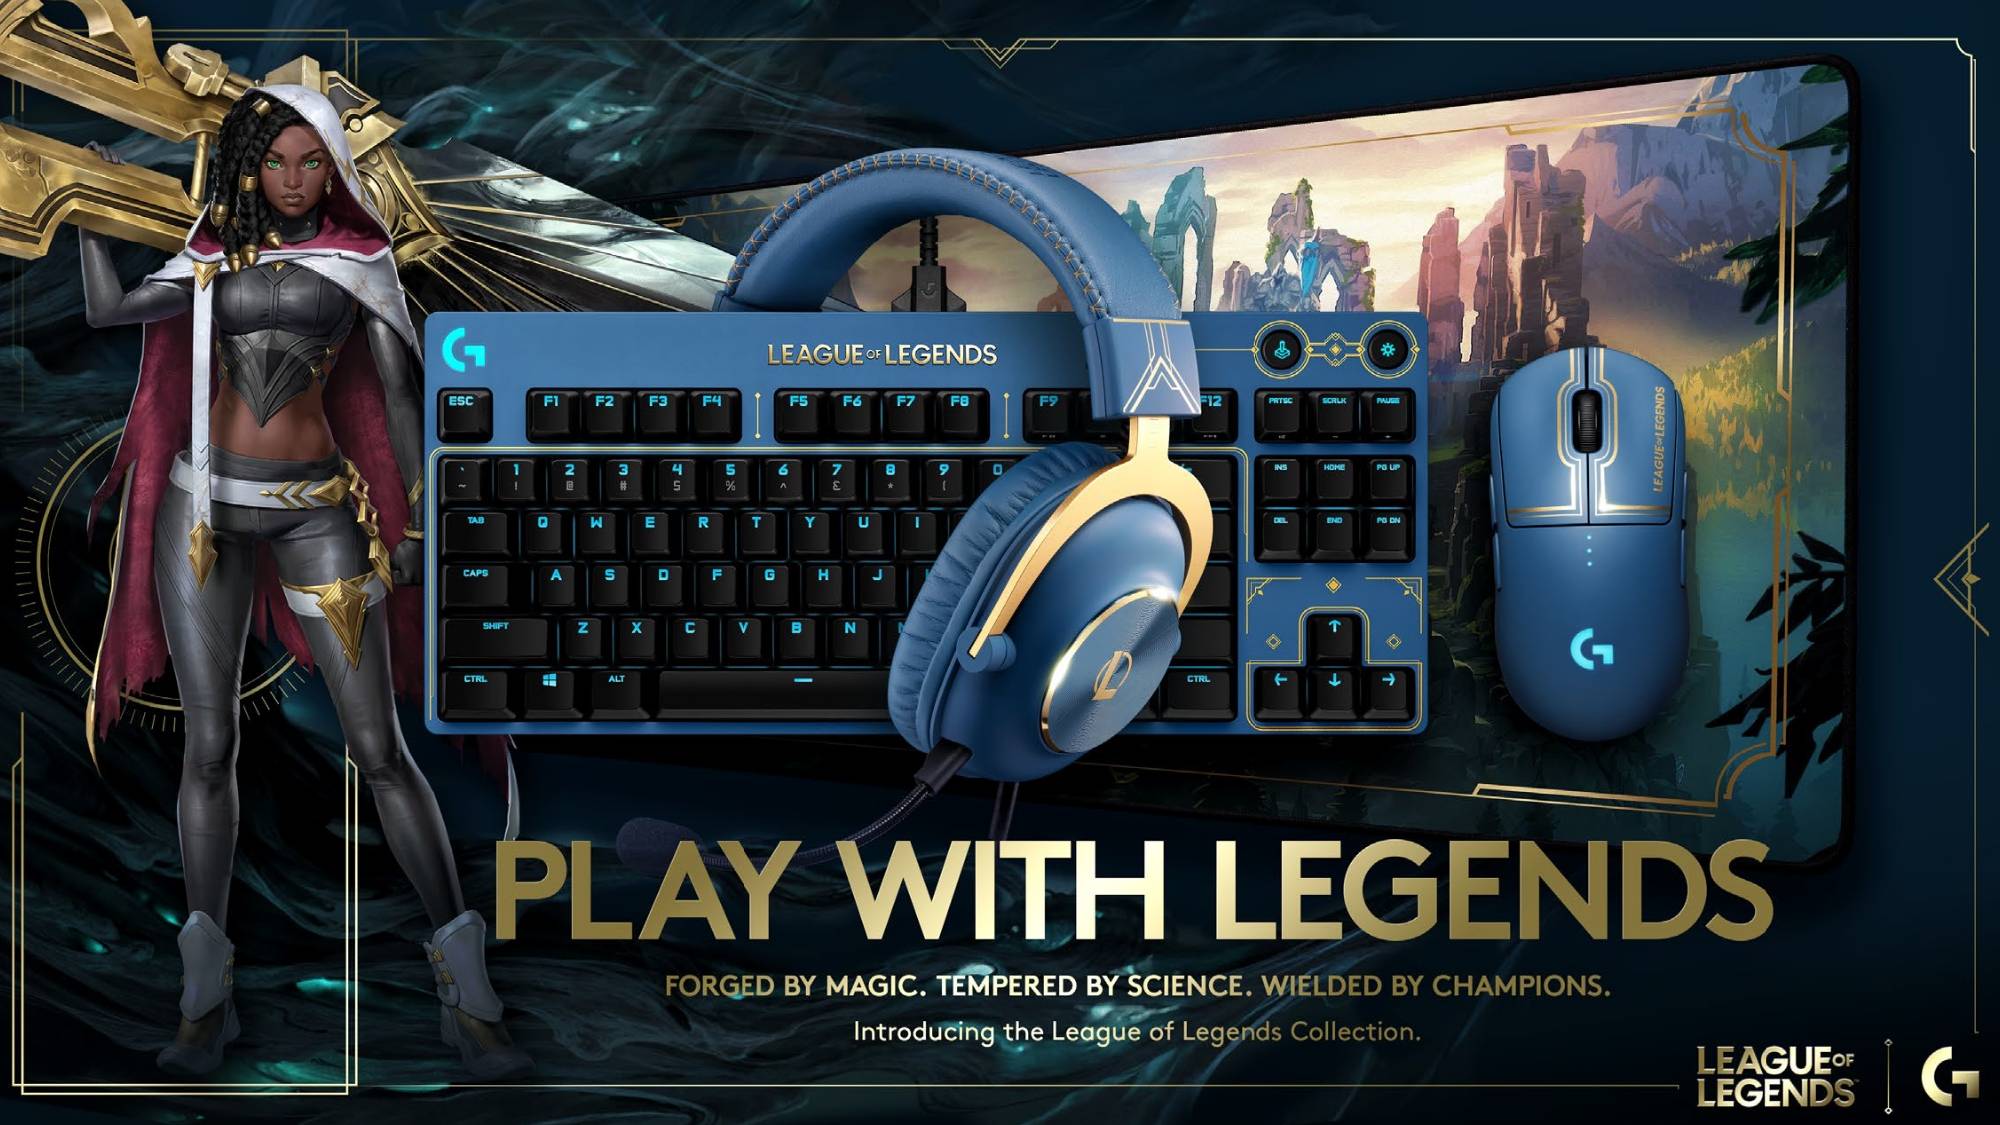 Save up to 60% on Logitech G Pro League of Legends gaming accessories |  Laptop Mag